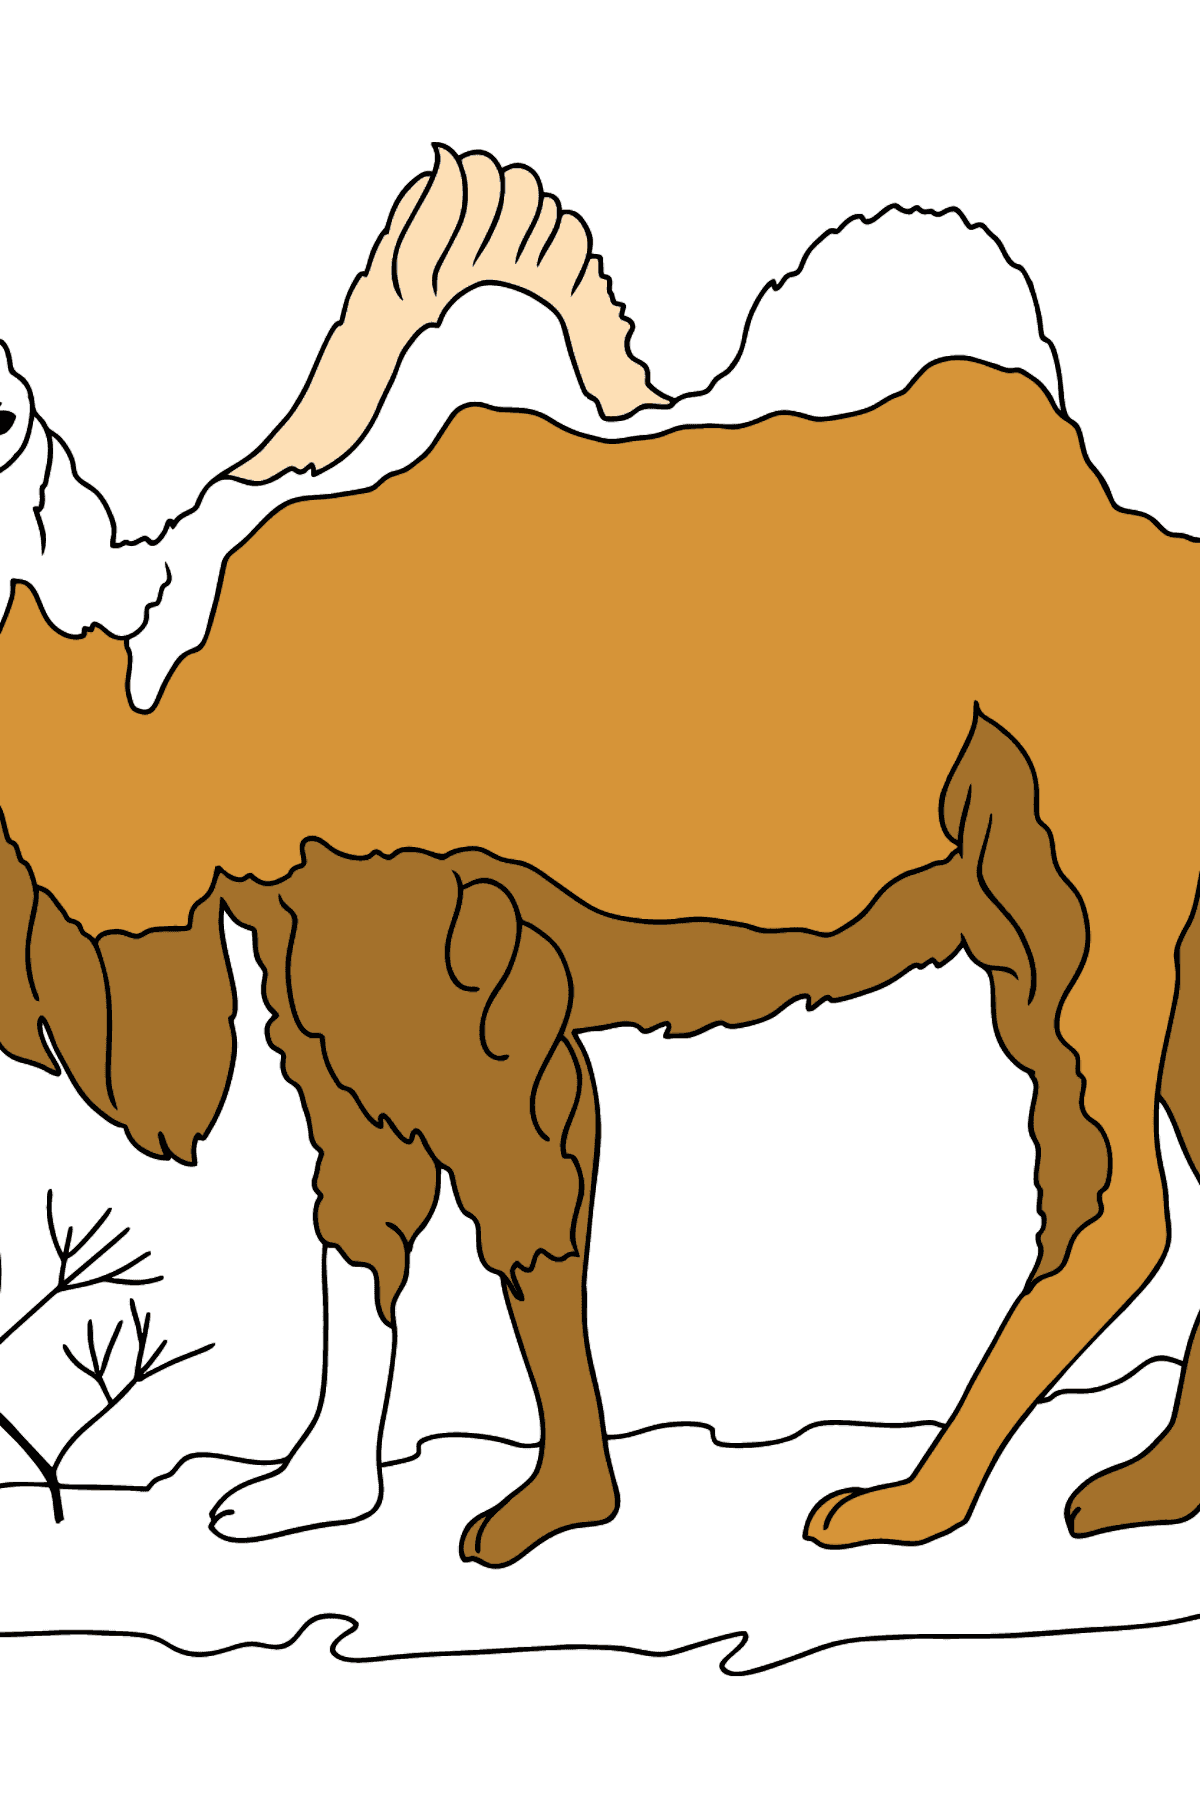 A Camel with Two Humped Coloring Page - Coloring Pages for Kids